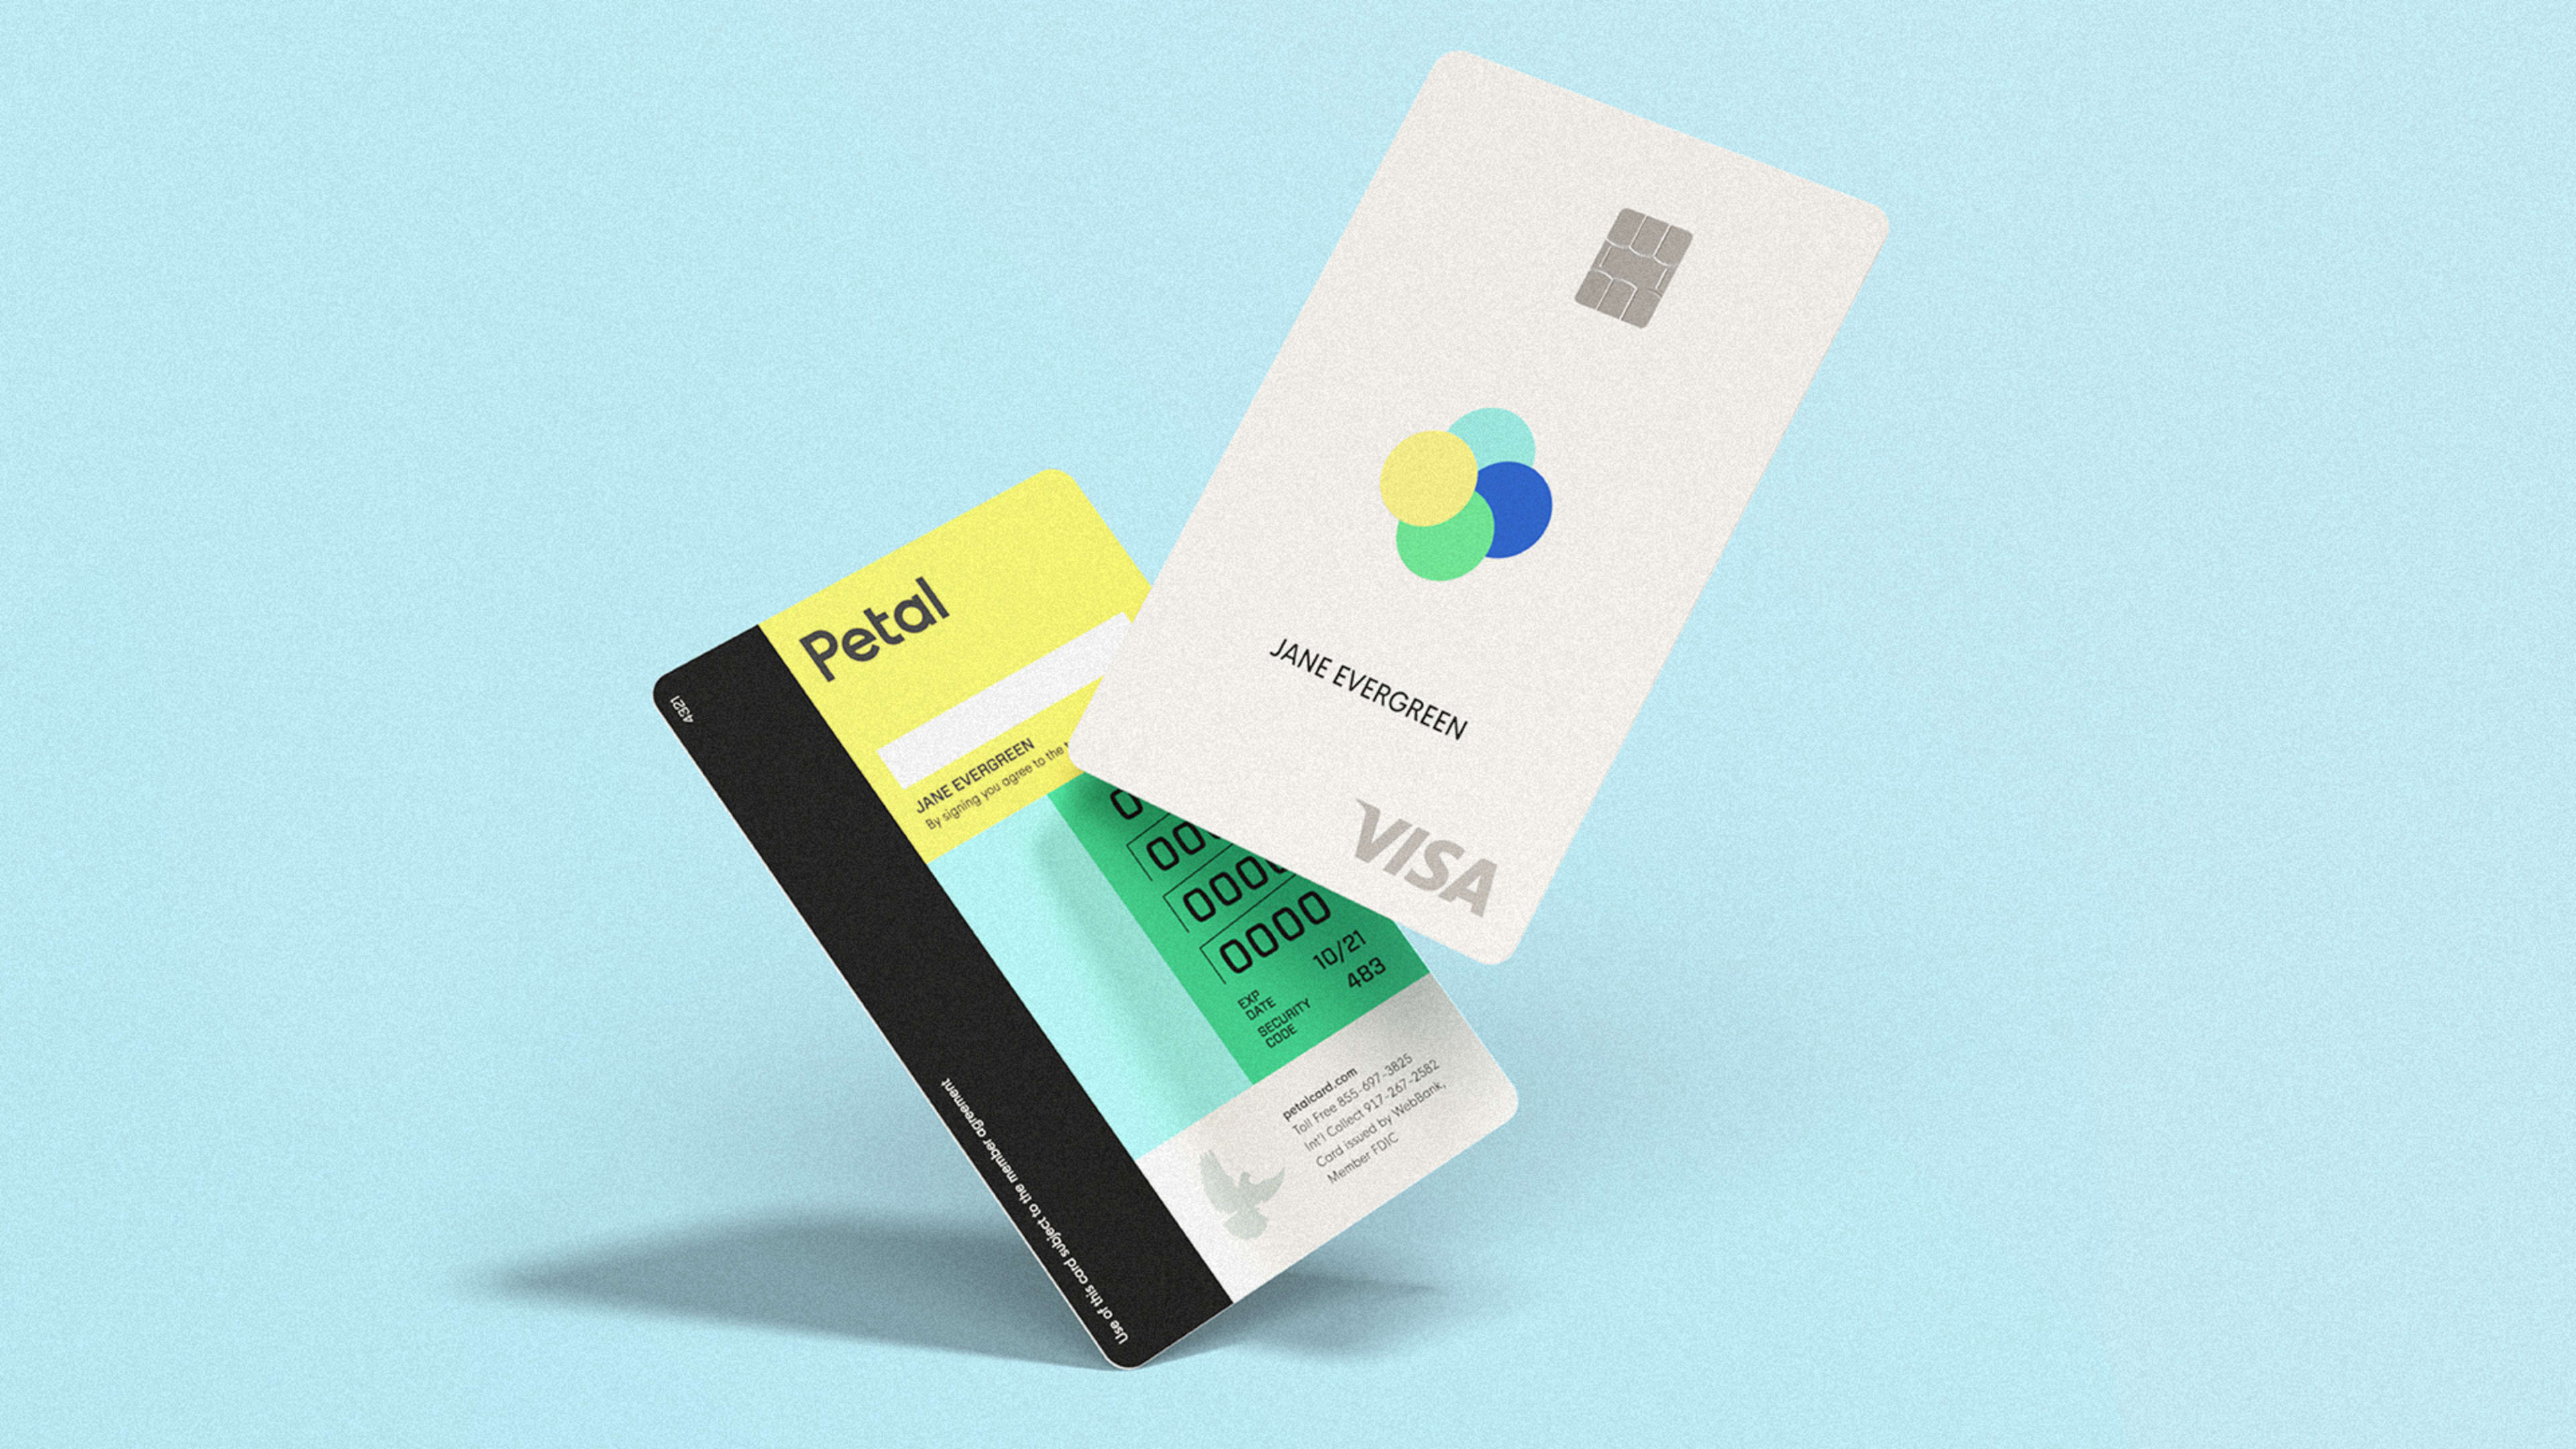 This new credit card helps build a credit score for people who don’t have one